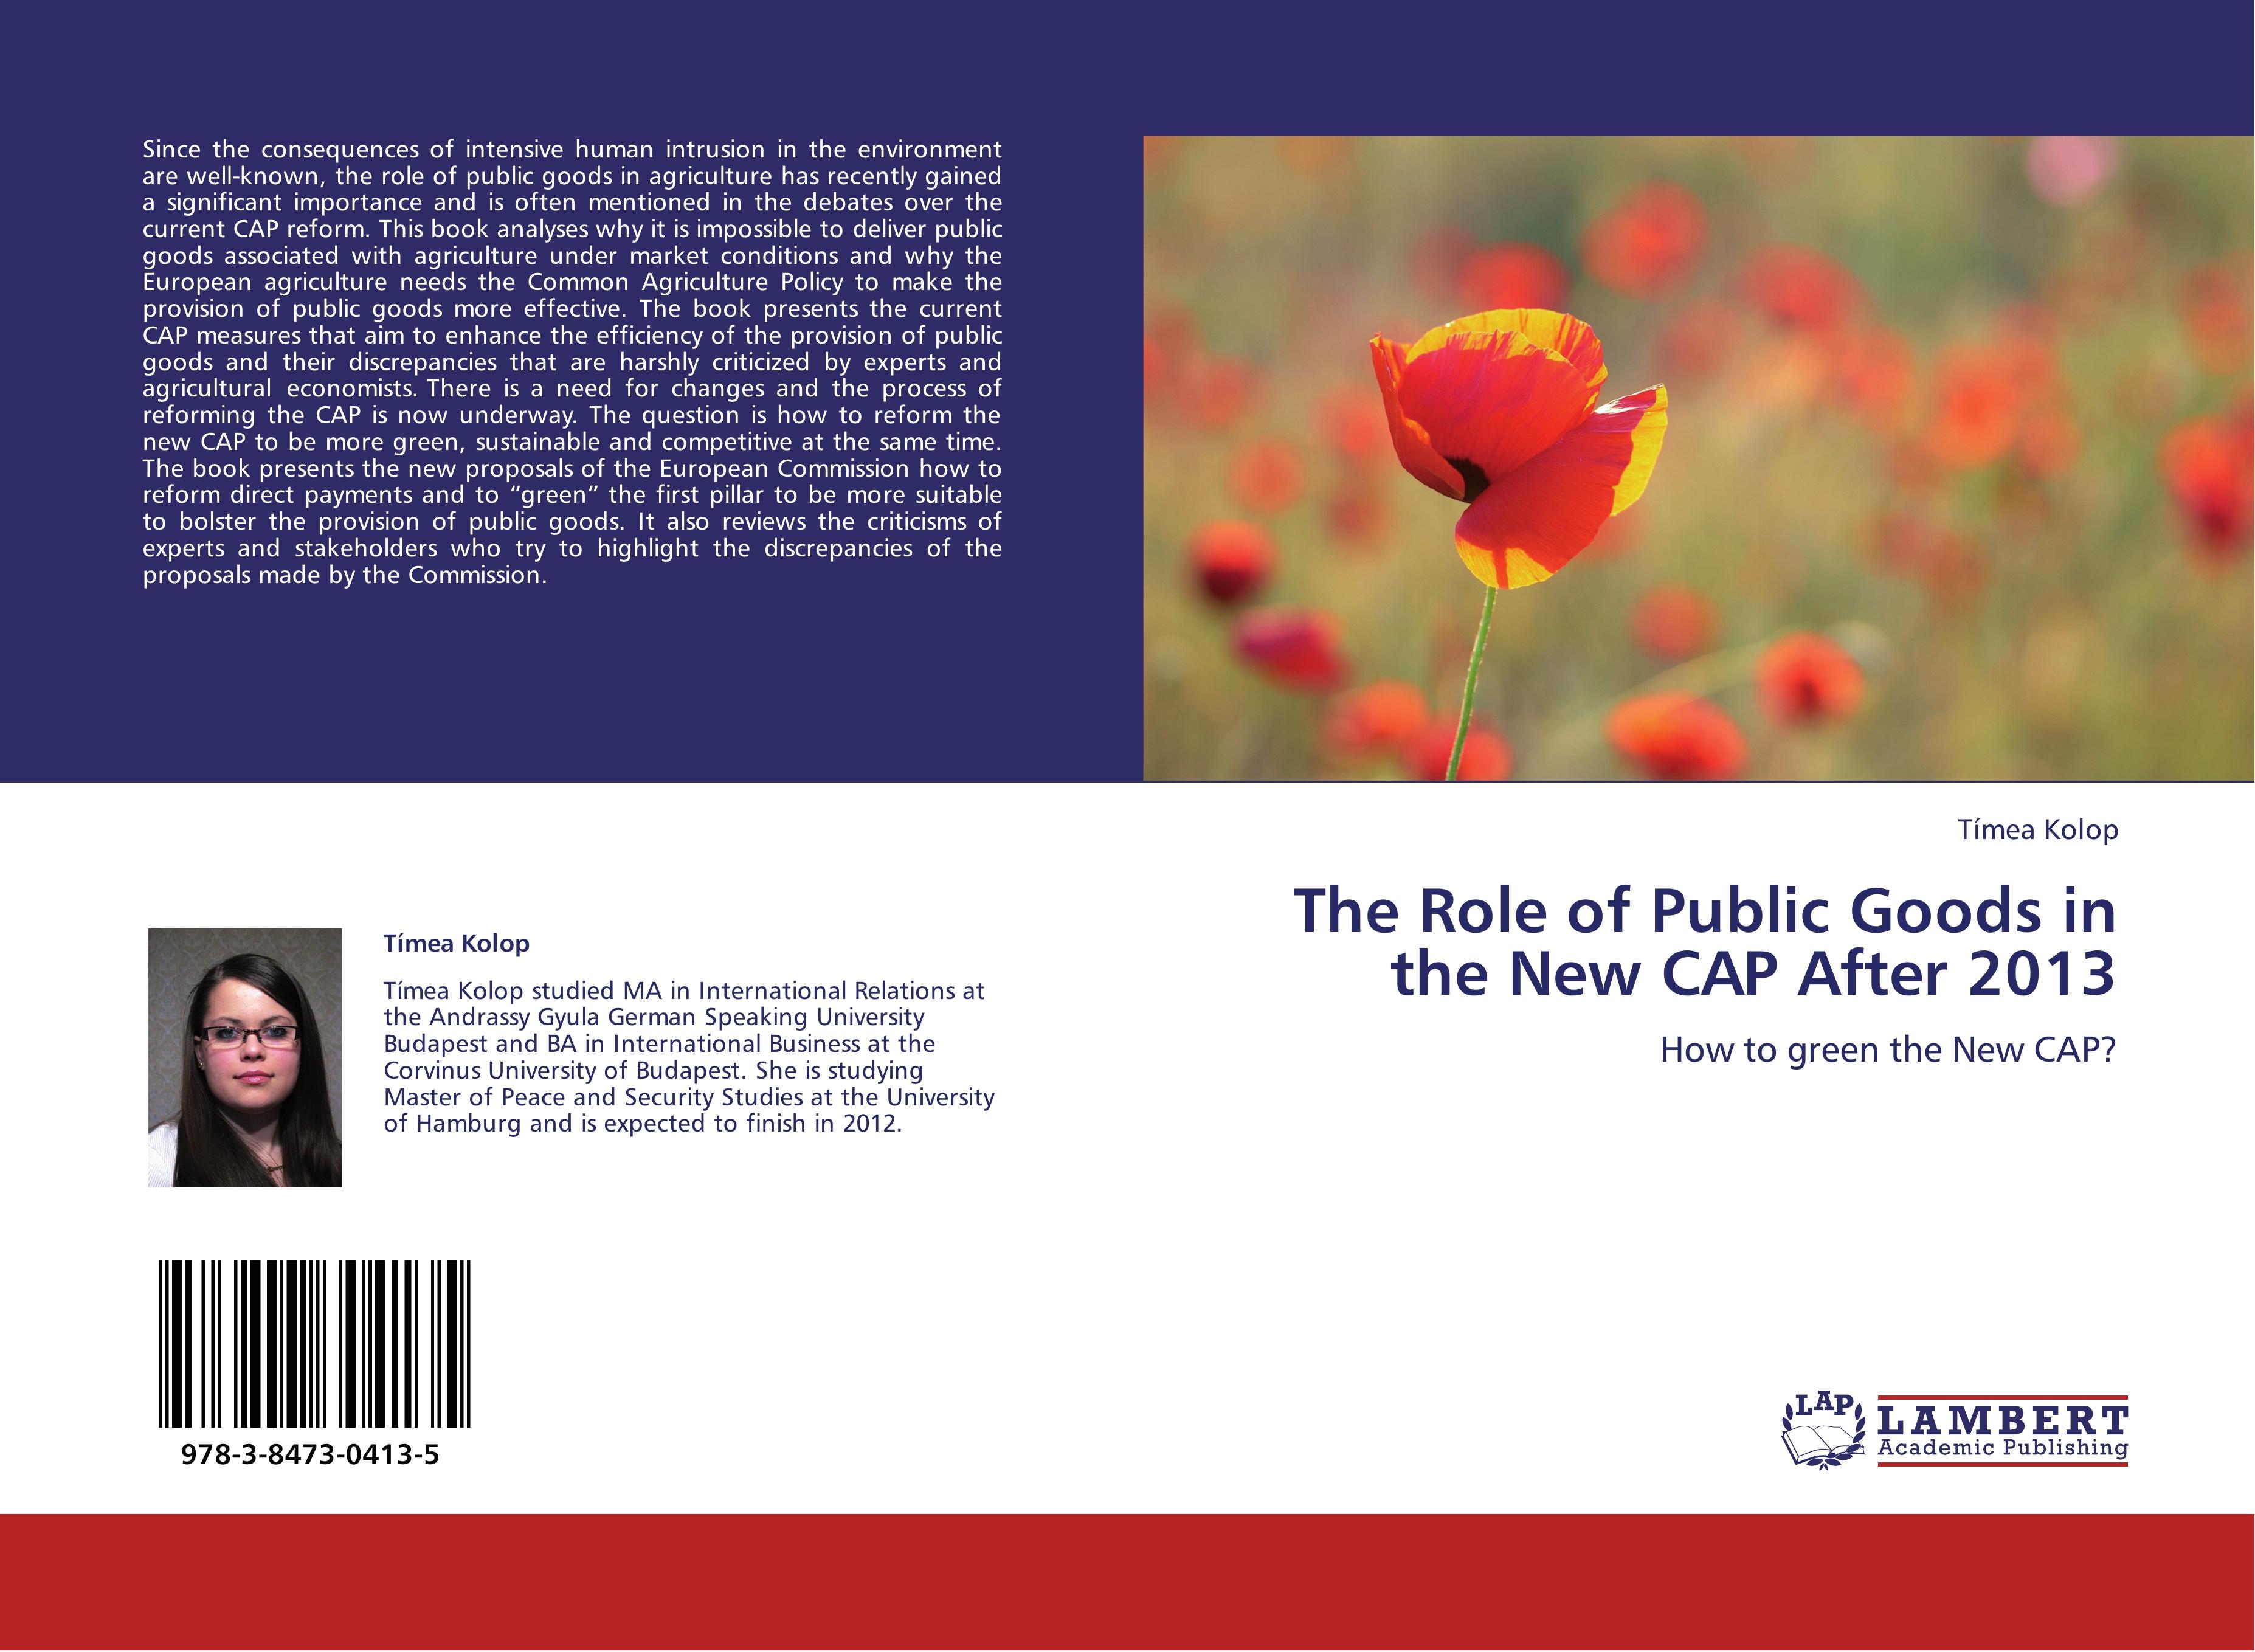 The Role of Public Goods in the New CAP After 2013 - Tímea Kolop